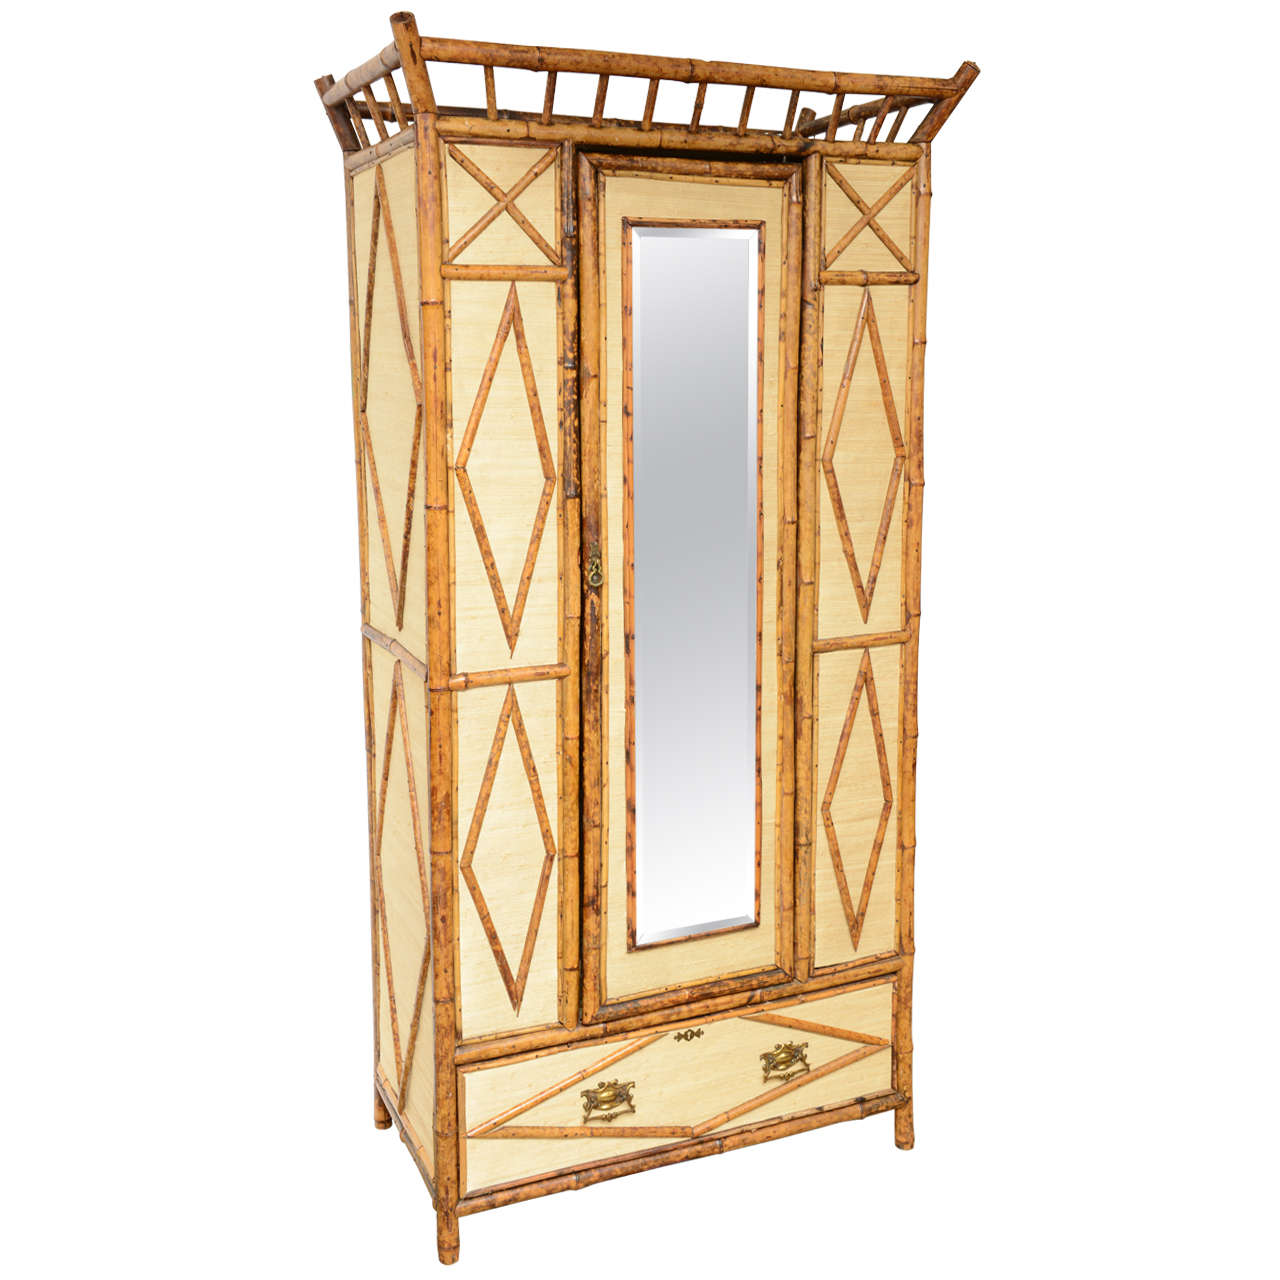 Superb 19th c. English Bamboo Wardrobe and Armoire